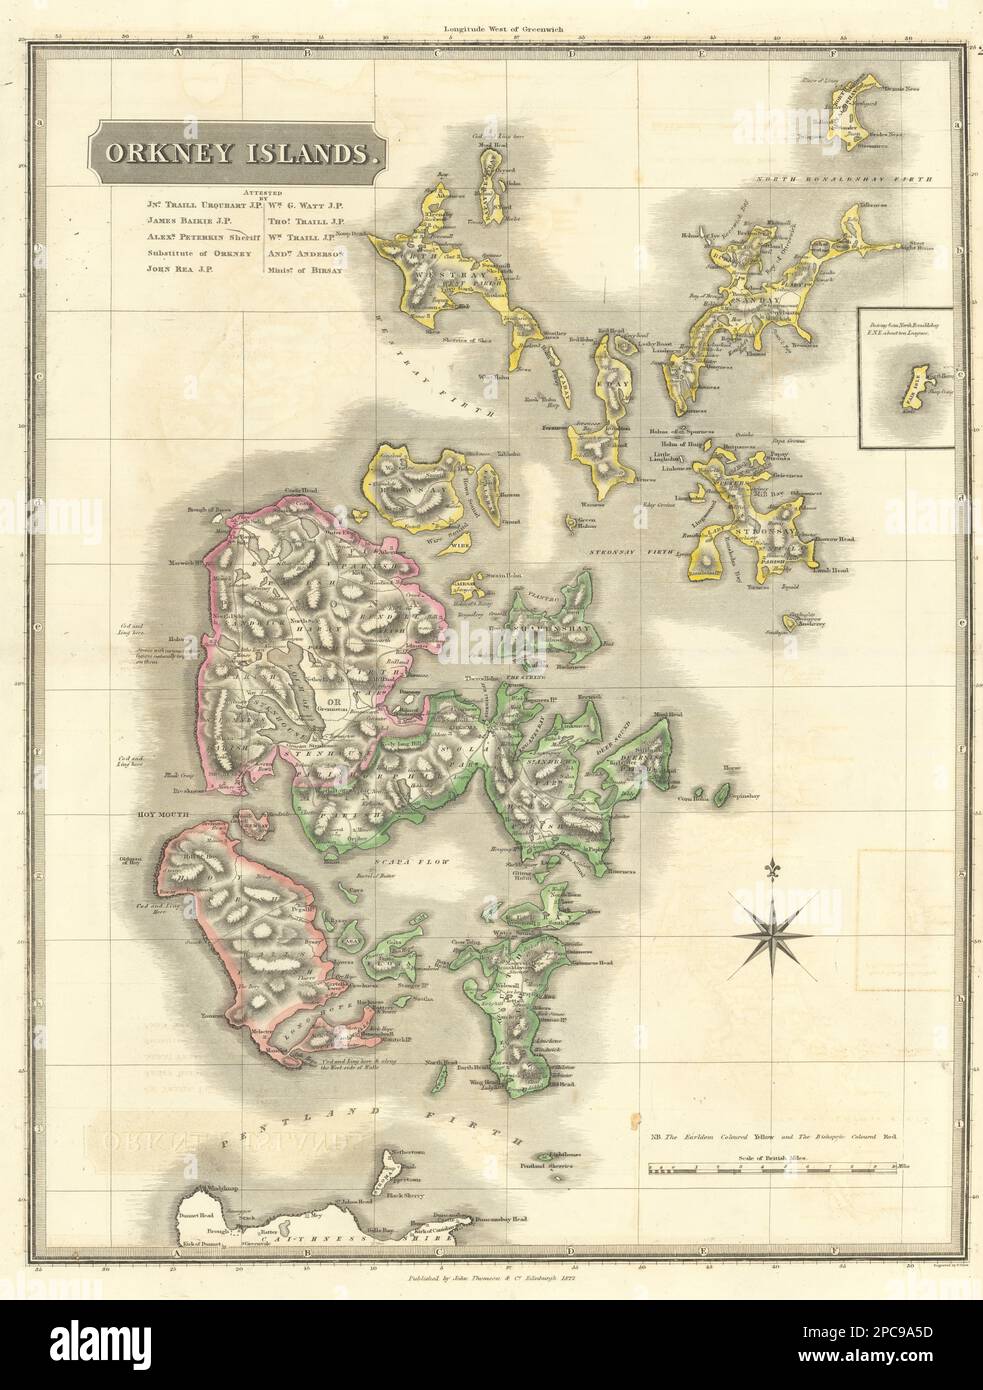 Orkney Islands. Kirkwall. Scotland. THOMSON 1832 old antique map plan chart Stock Photo